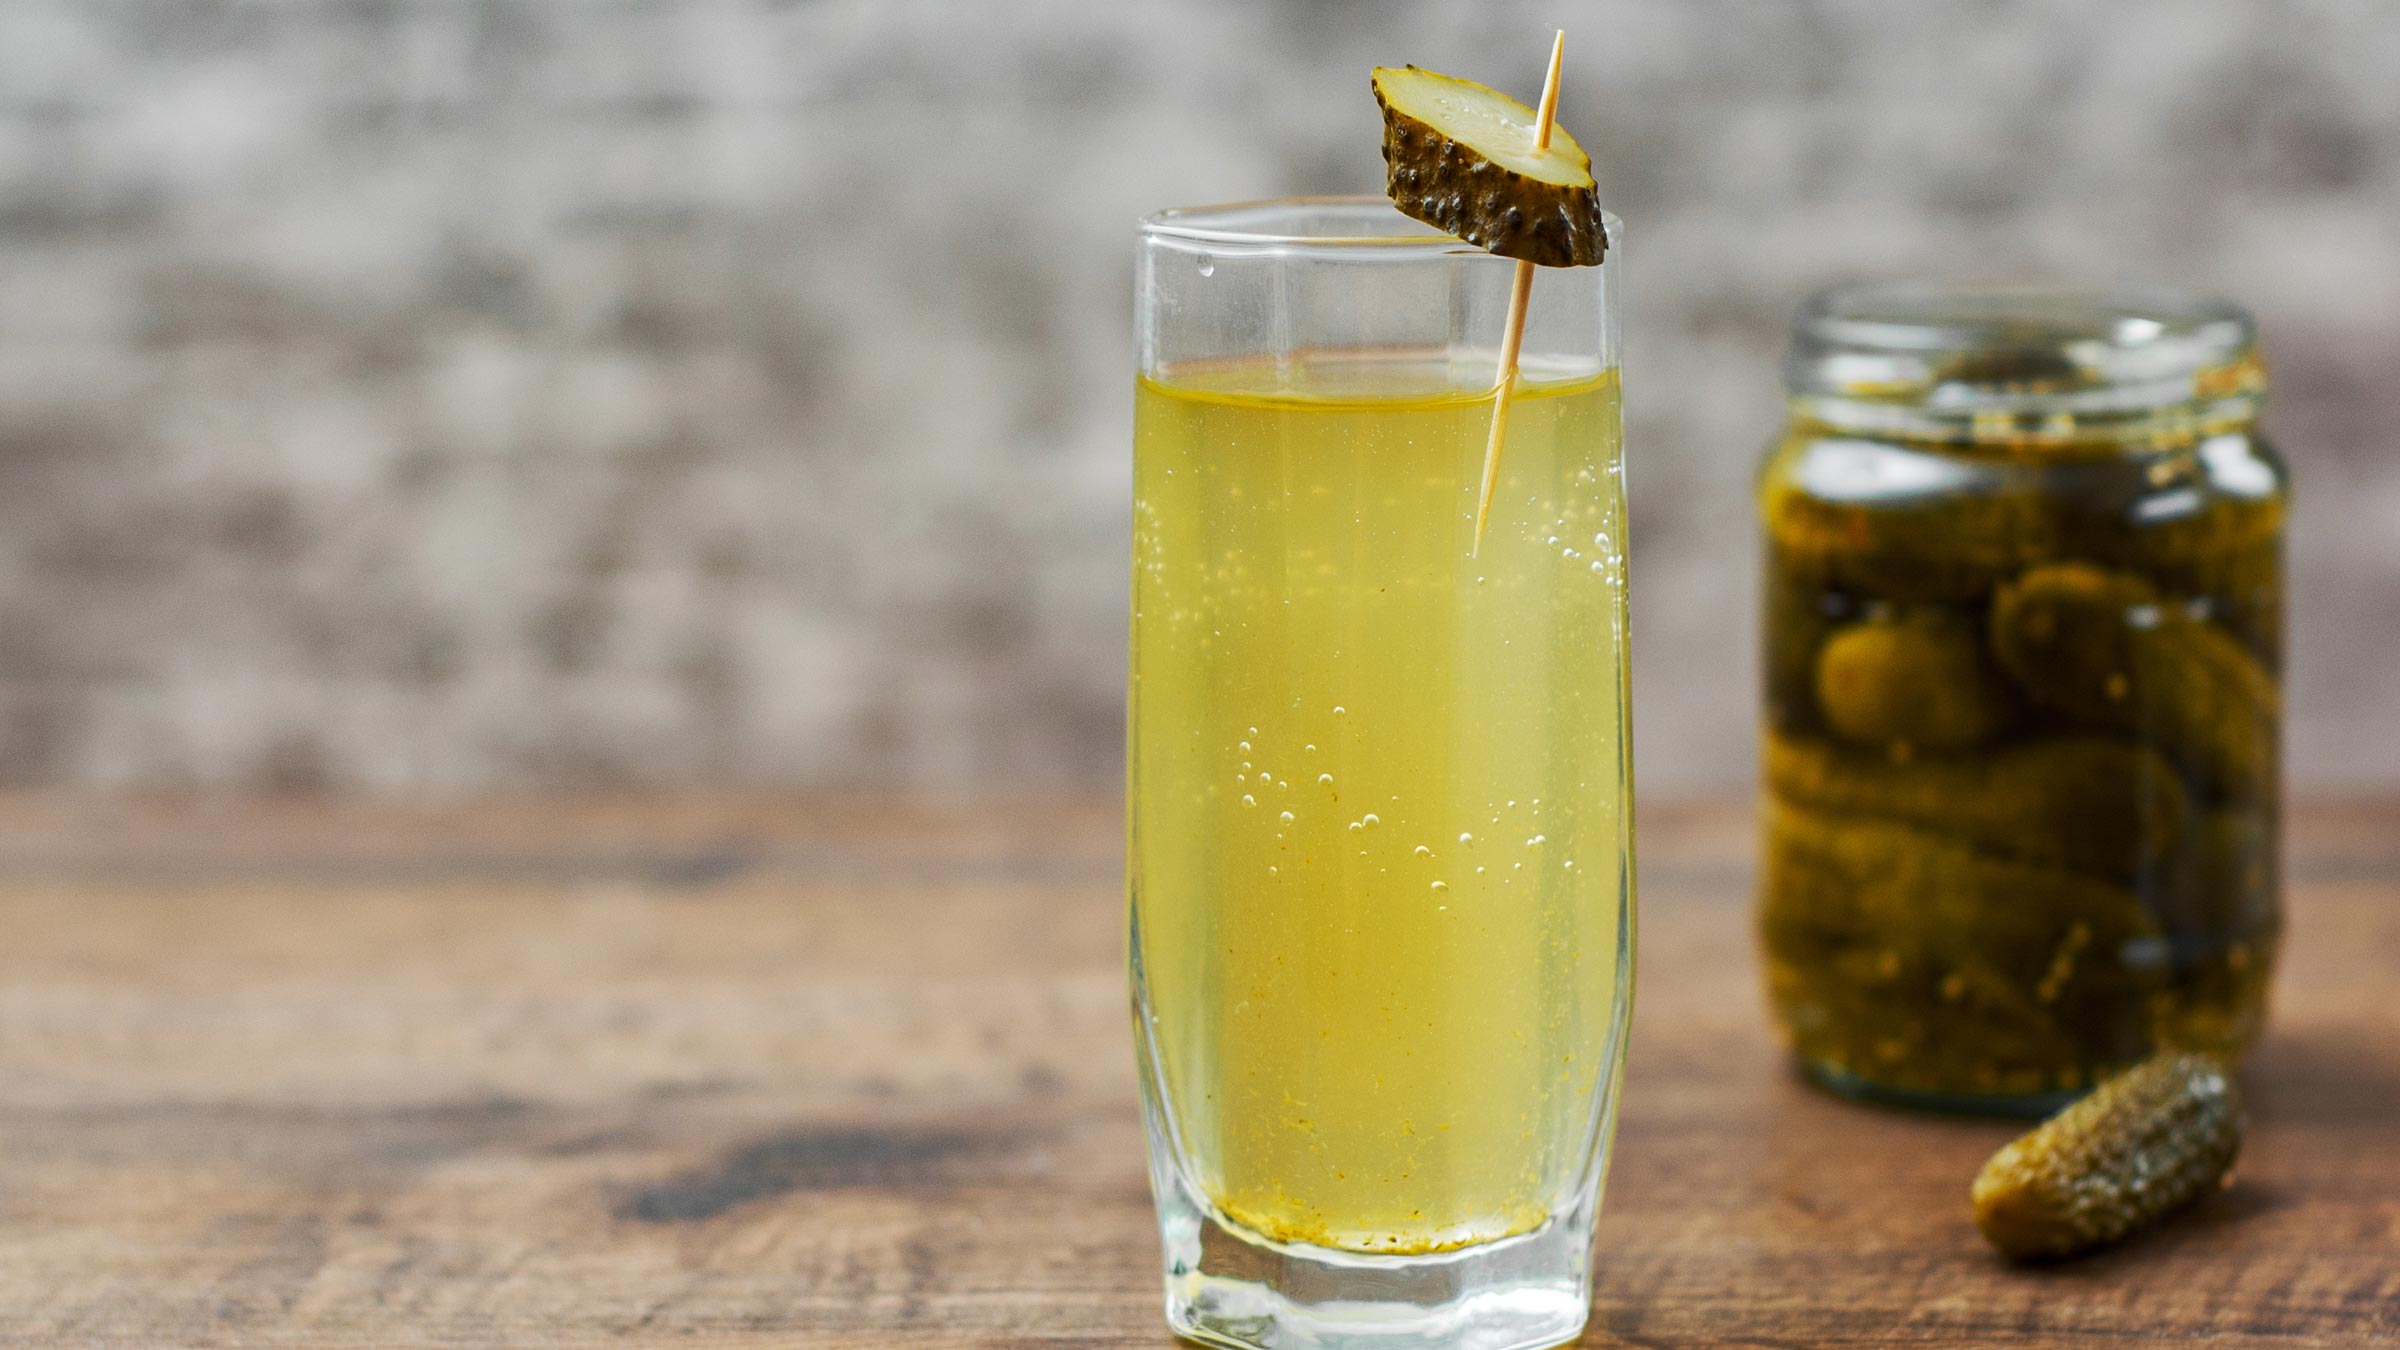 Pickle juice in a glass with an opened jar of pickles nearby